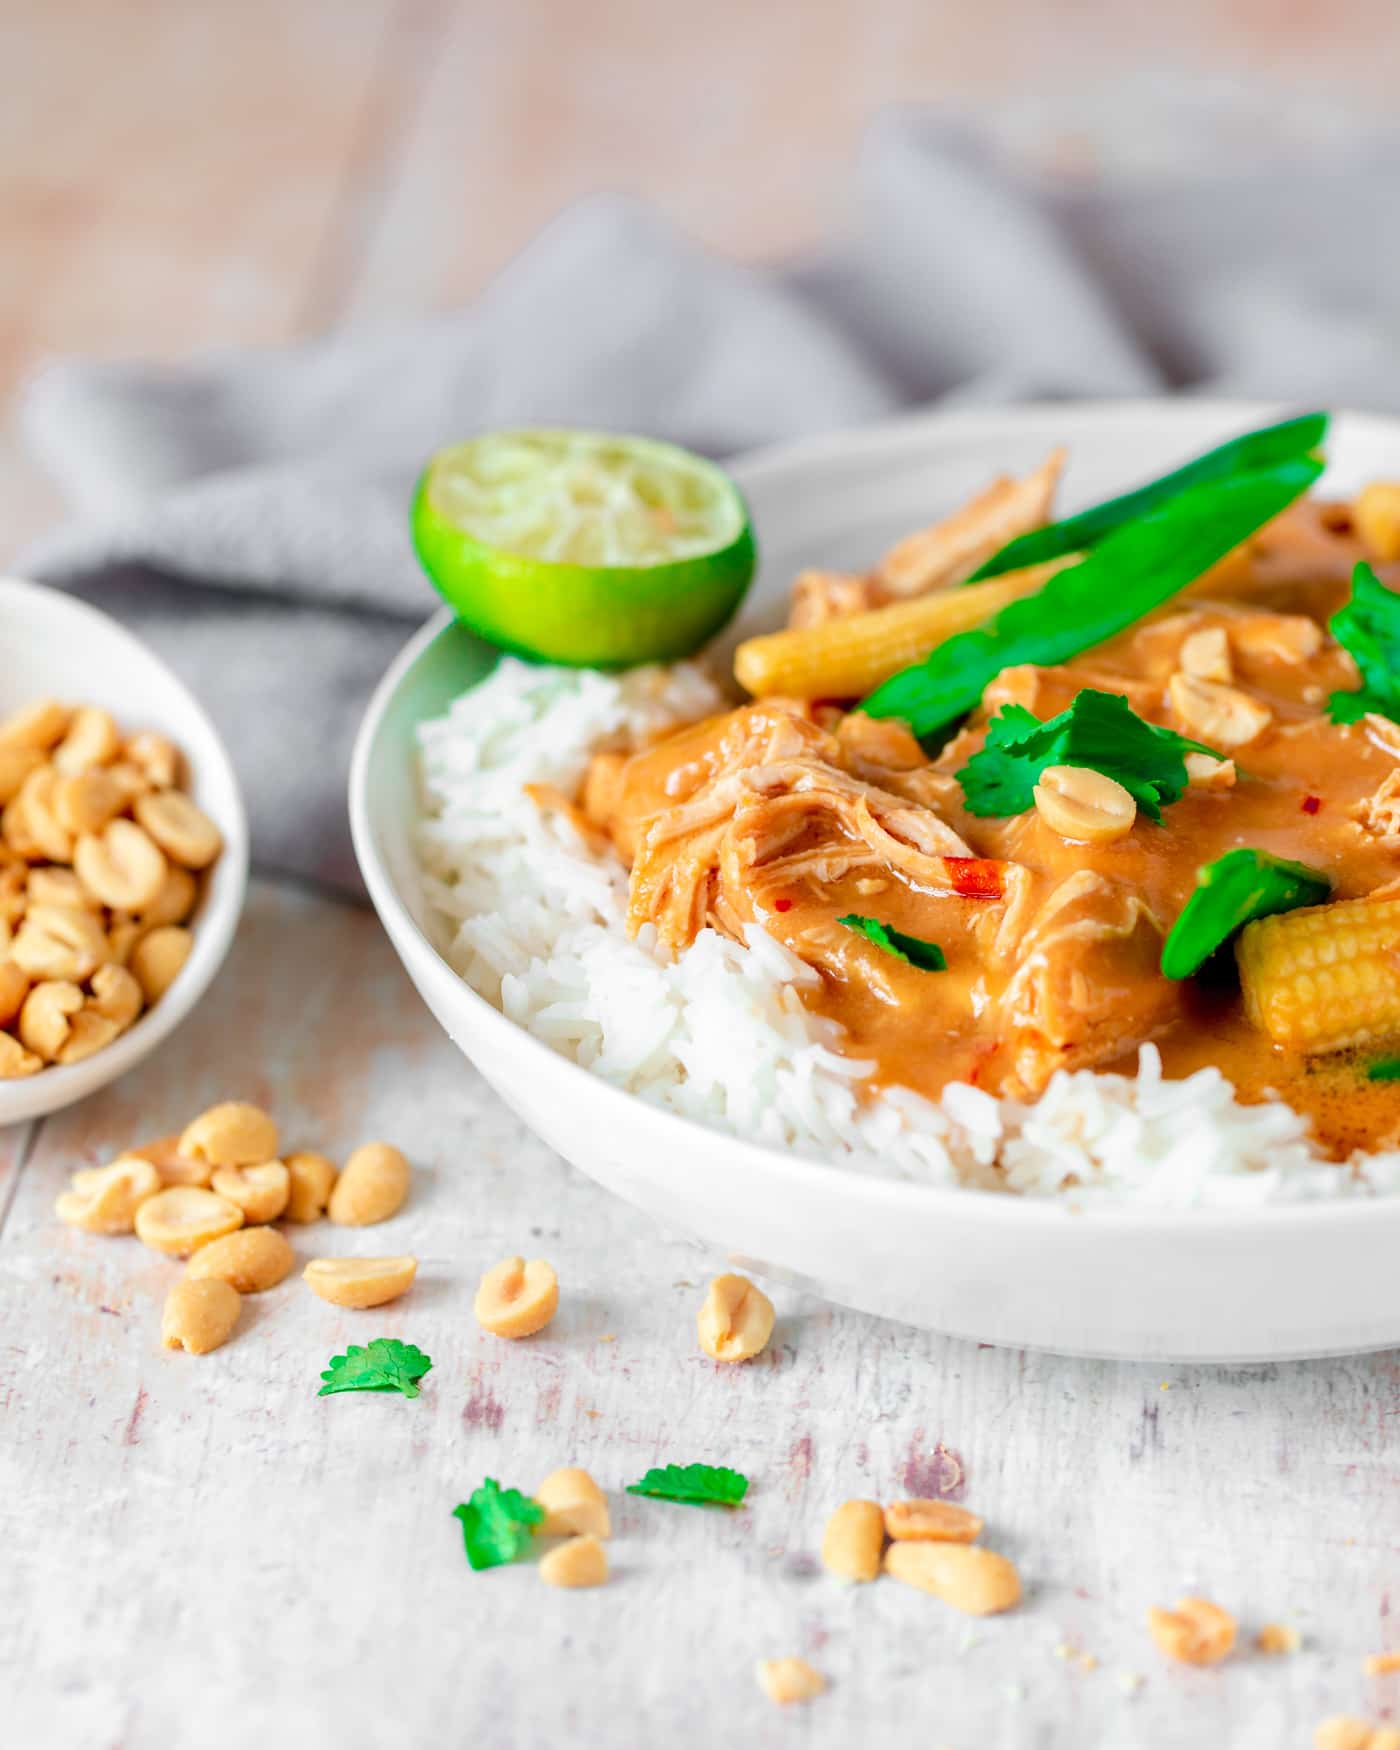 slow cooker peanut chicken in a white serving dish with white rice. Peanuts are falling out of a small white bowl and coriander is scattered at the front